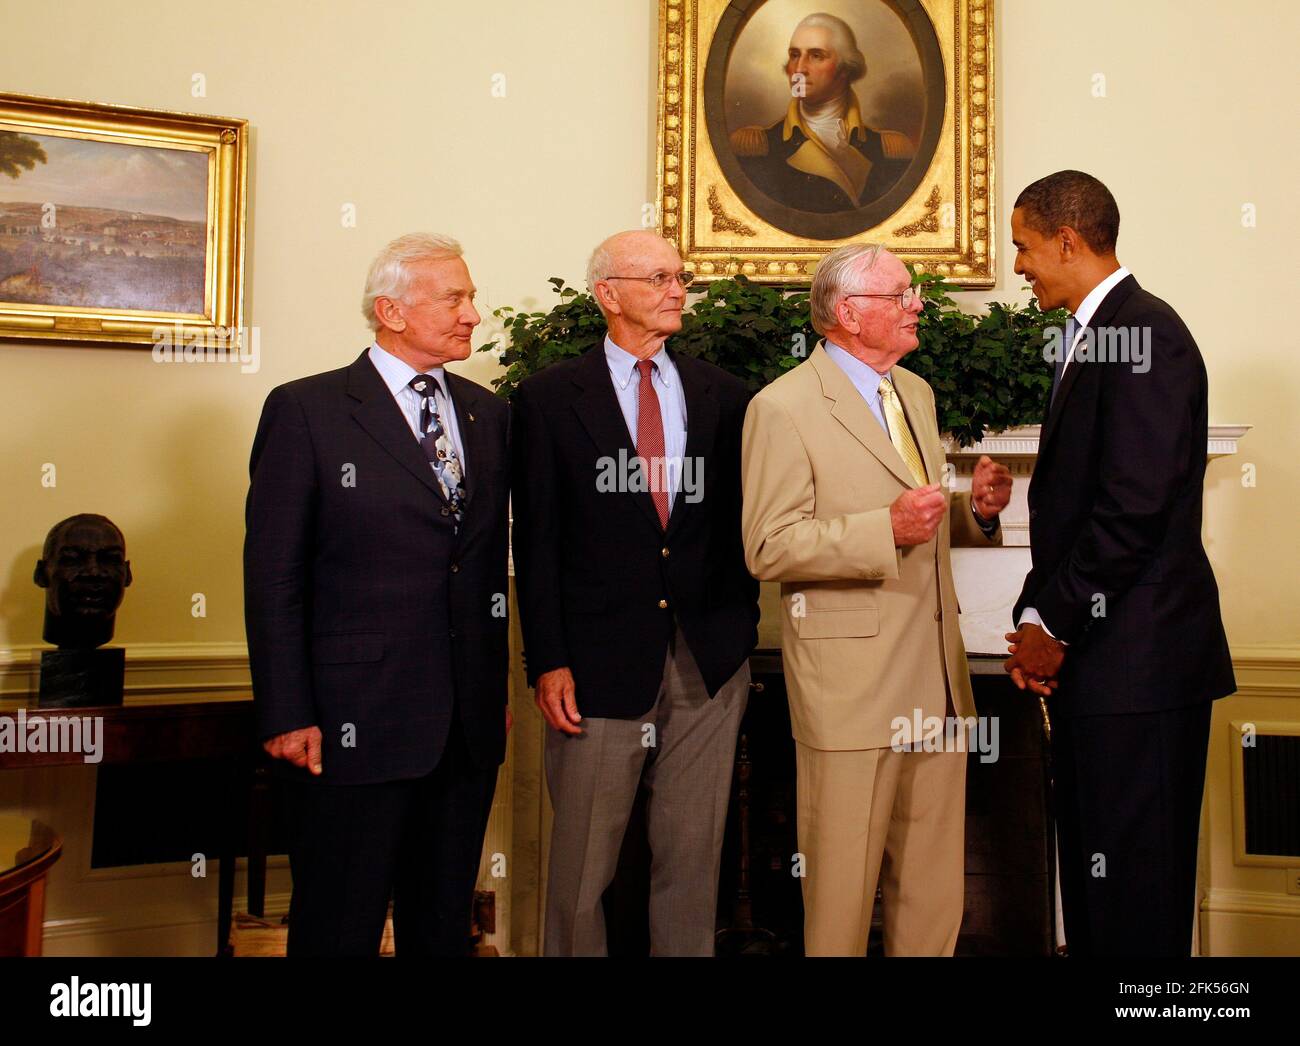 Washington, DC - July 20, 2009 -- United States President Barack Obama meets with Apollo 11 crew members (l-r) Edwin Eugene 'Buzz' Aldrin, Jr., Michael Collins, and Neil Armstrong in the Oval Office of the White House on the 40th anniversary of the astronauts' lunar landing, Washington, DC, Monday, July 20, 2009. Credit: Martin H. Simon/Pool via CNP /MediaPunch Stock Photo